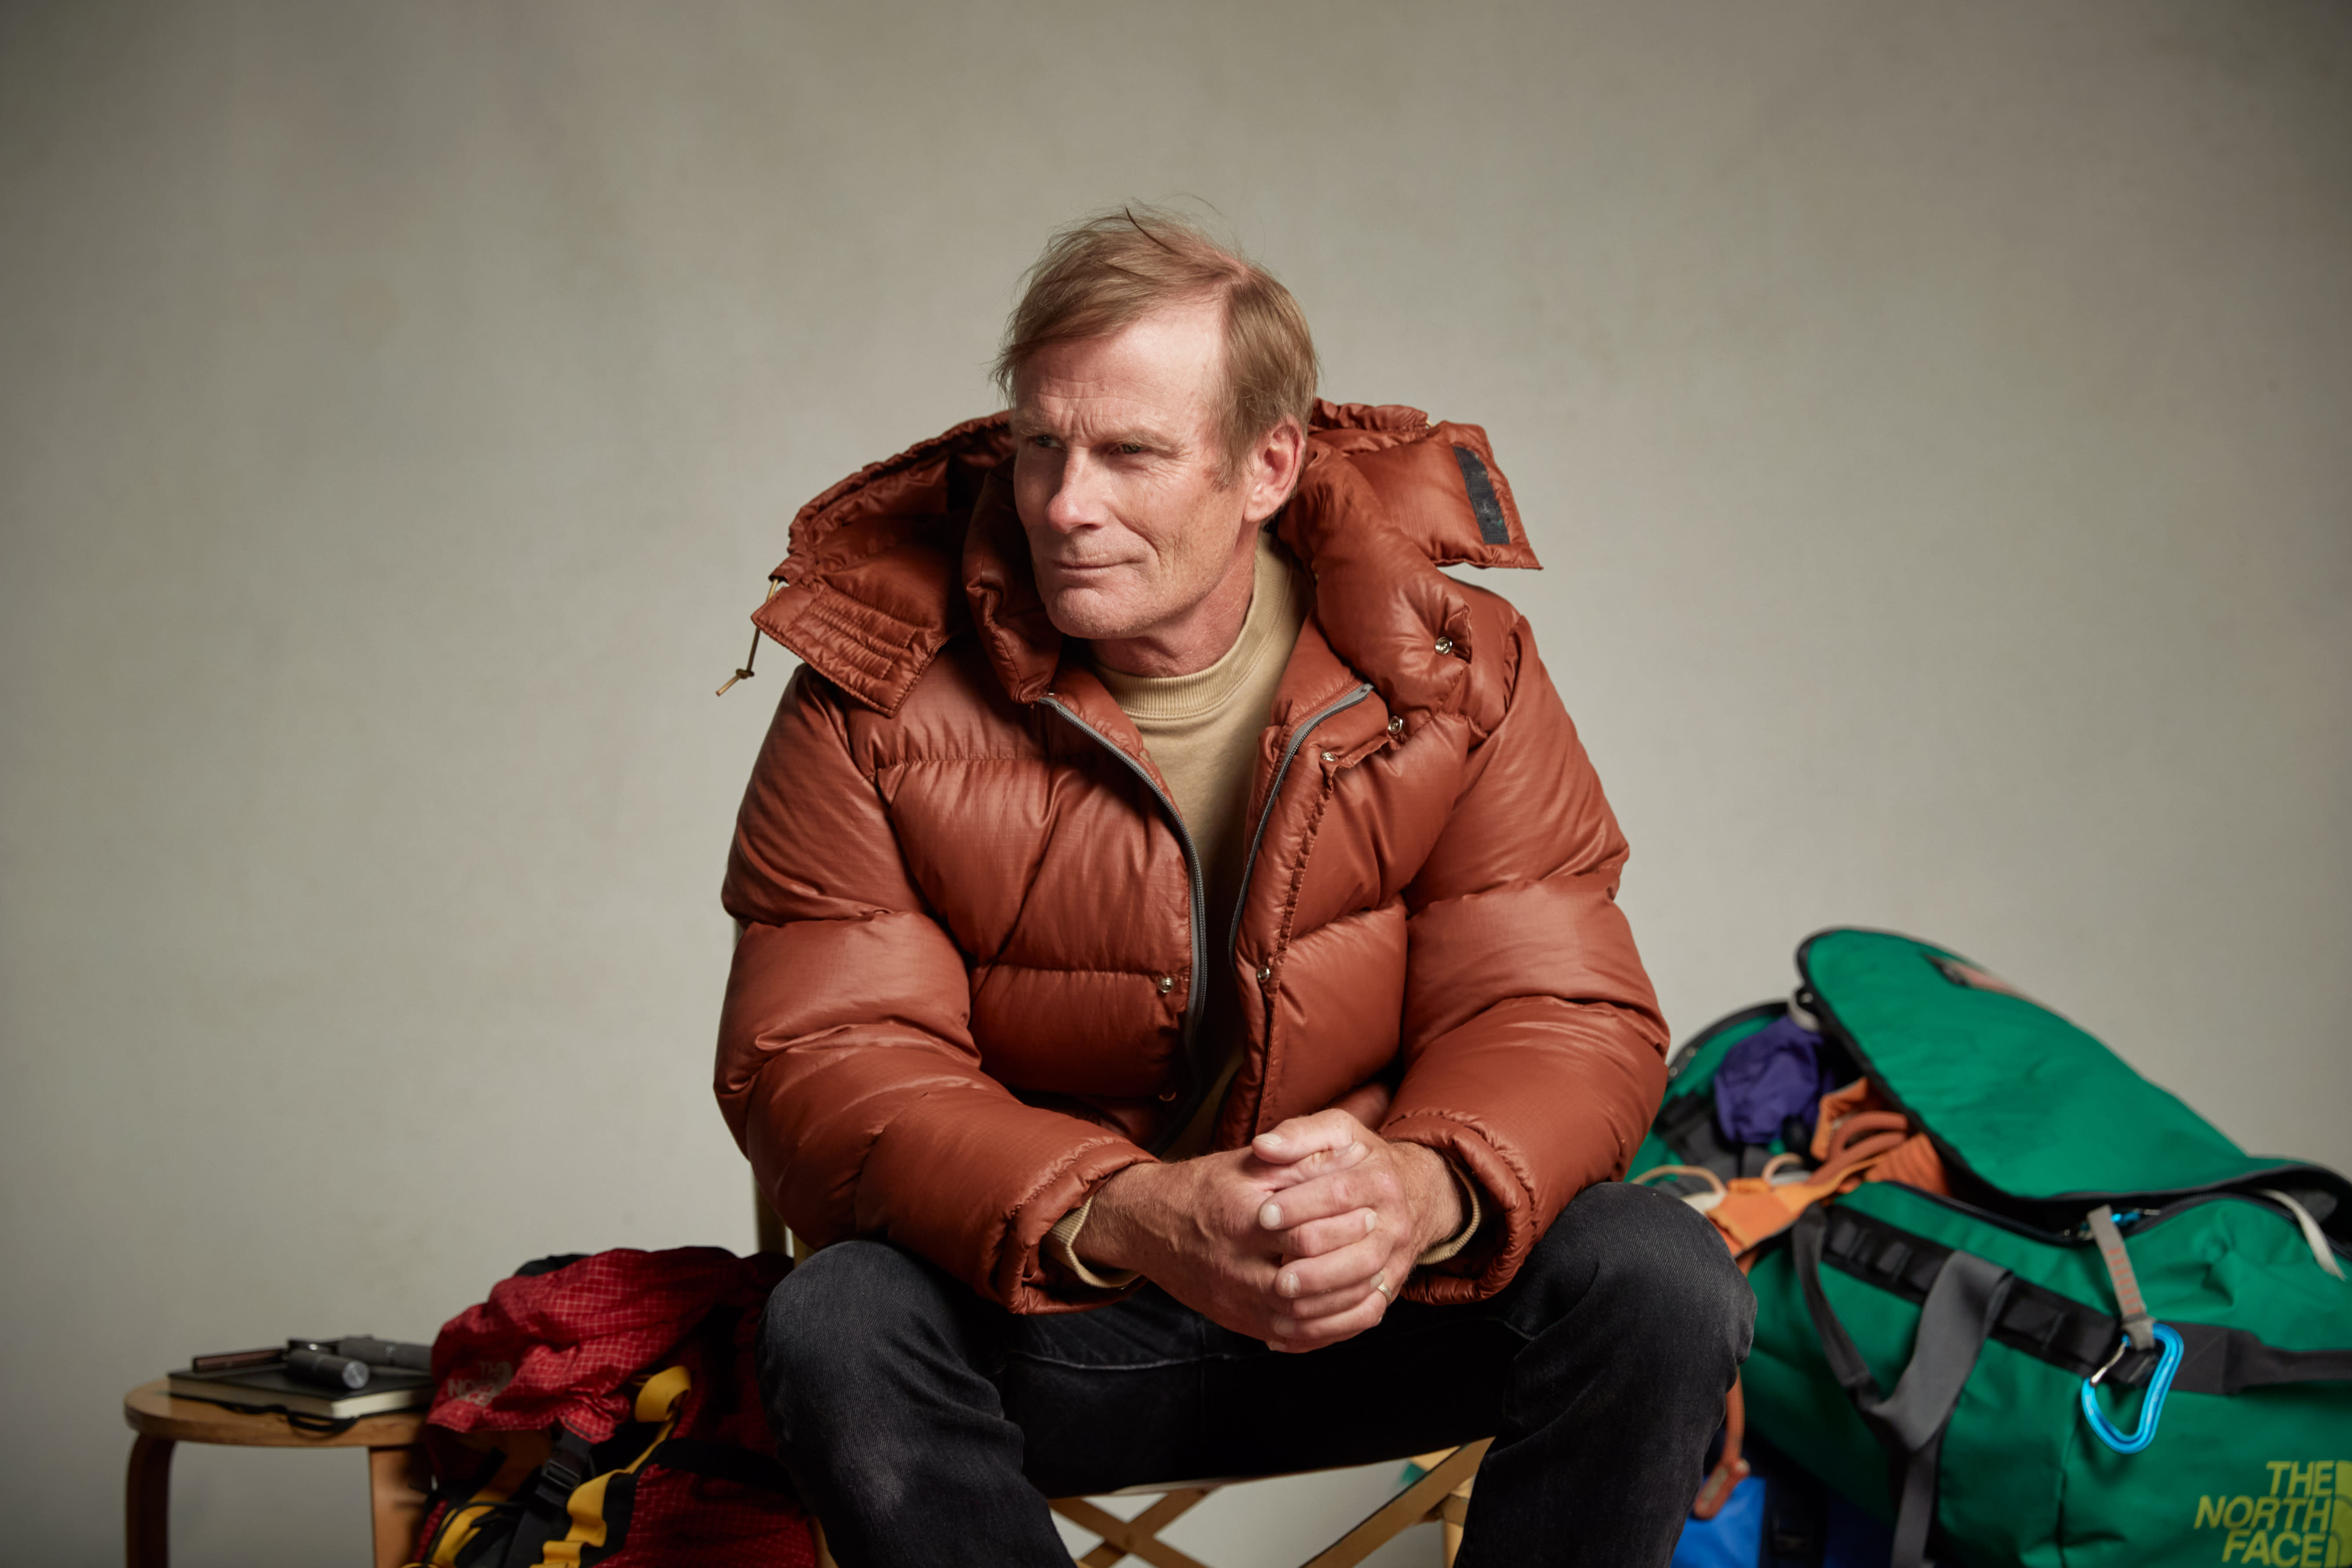 The North Face launches new campaign.